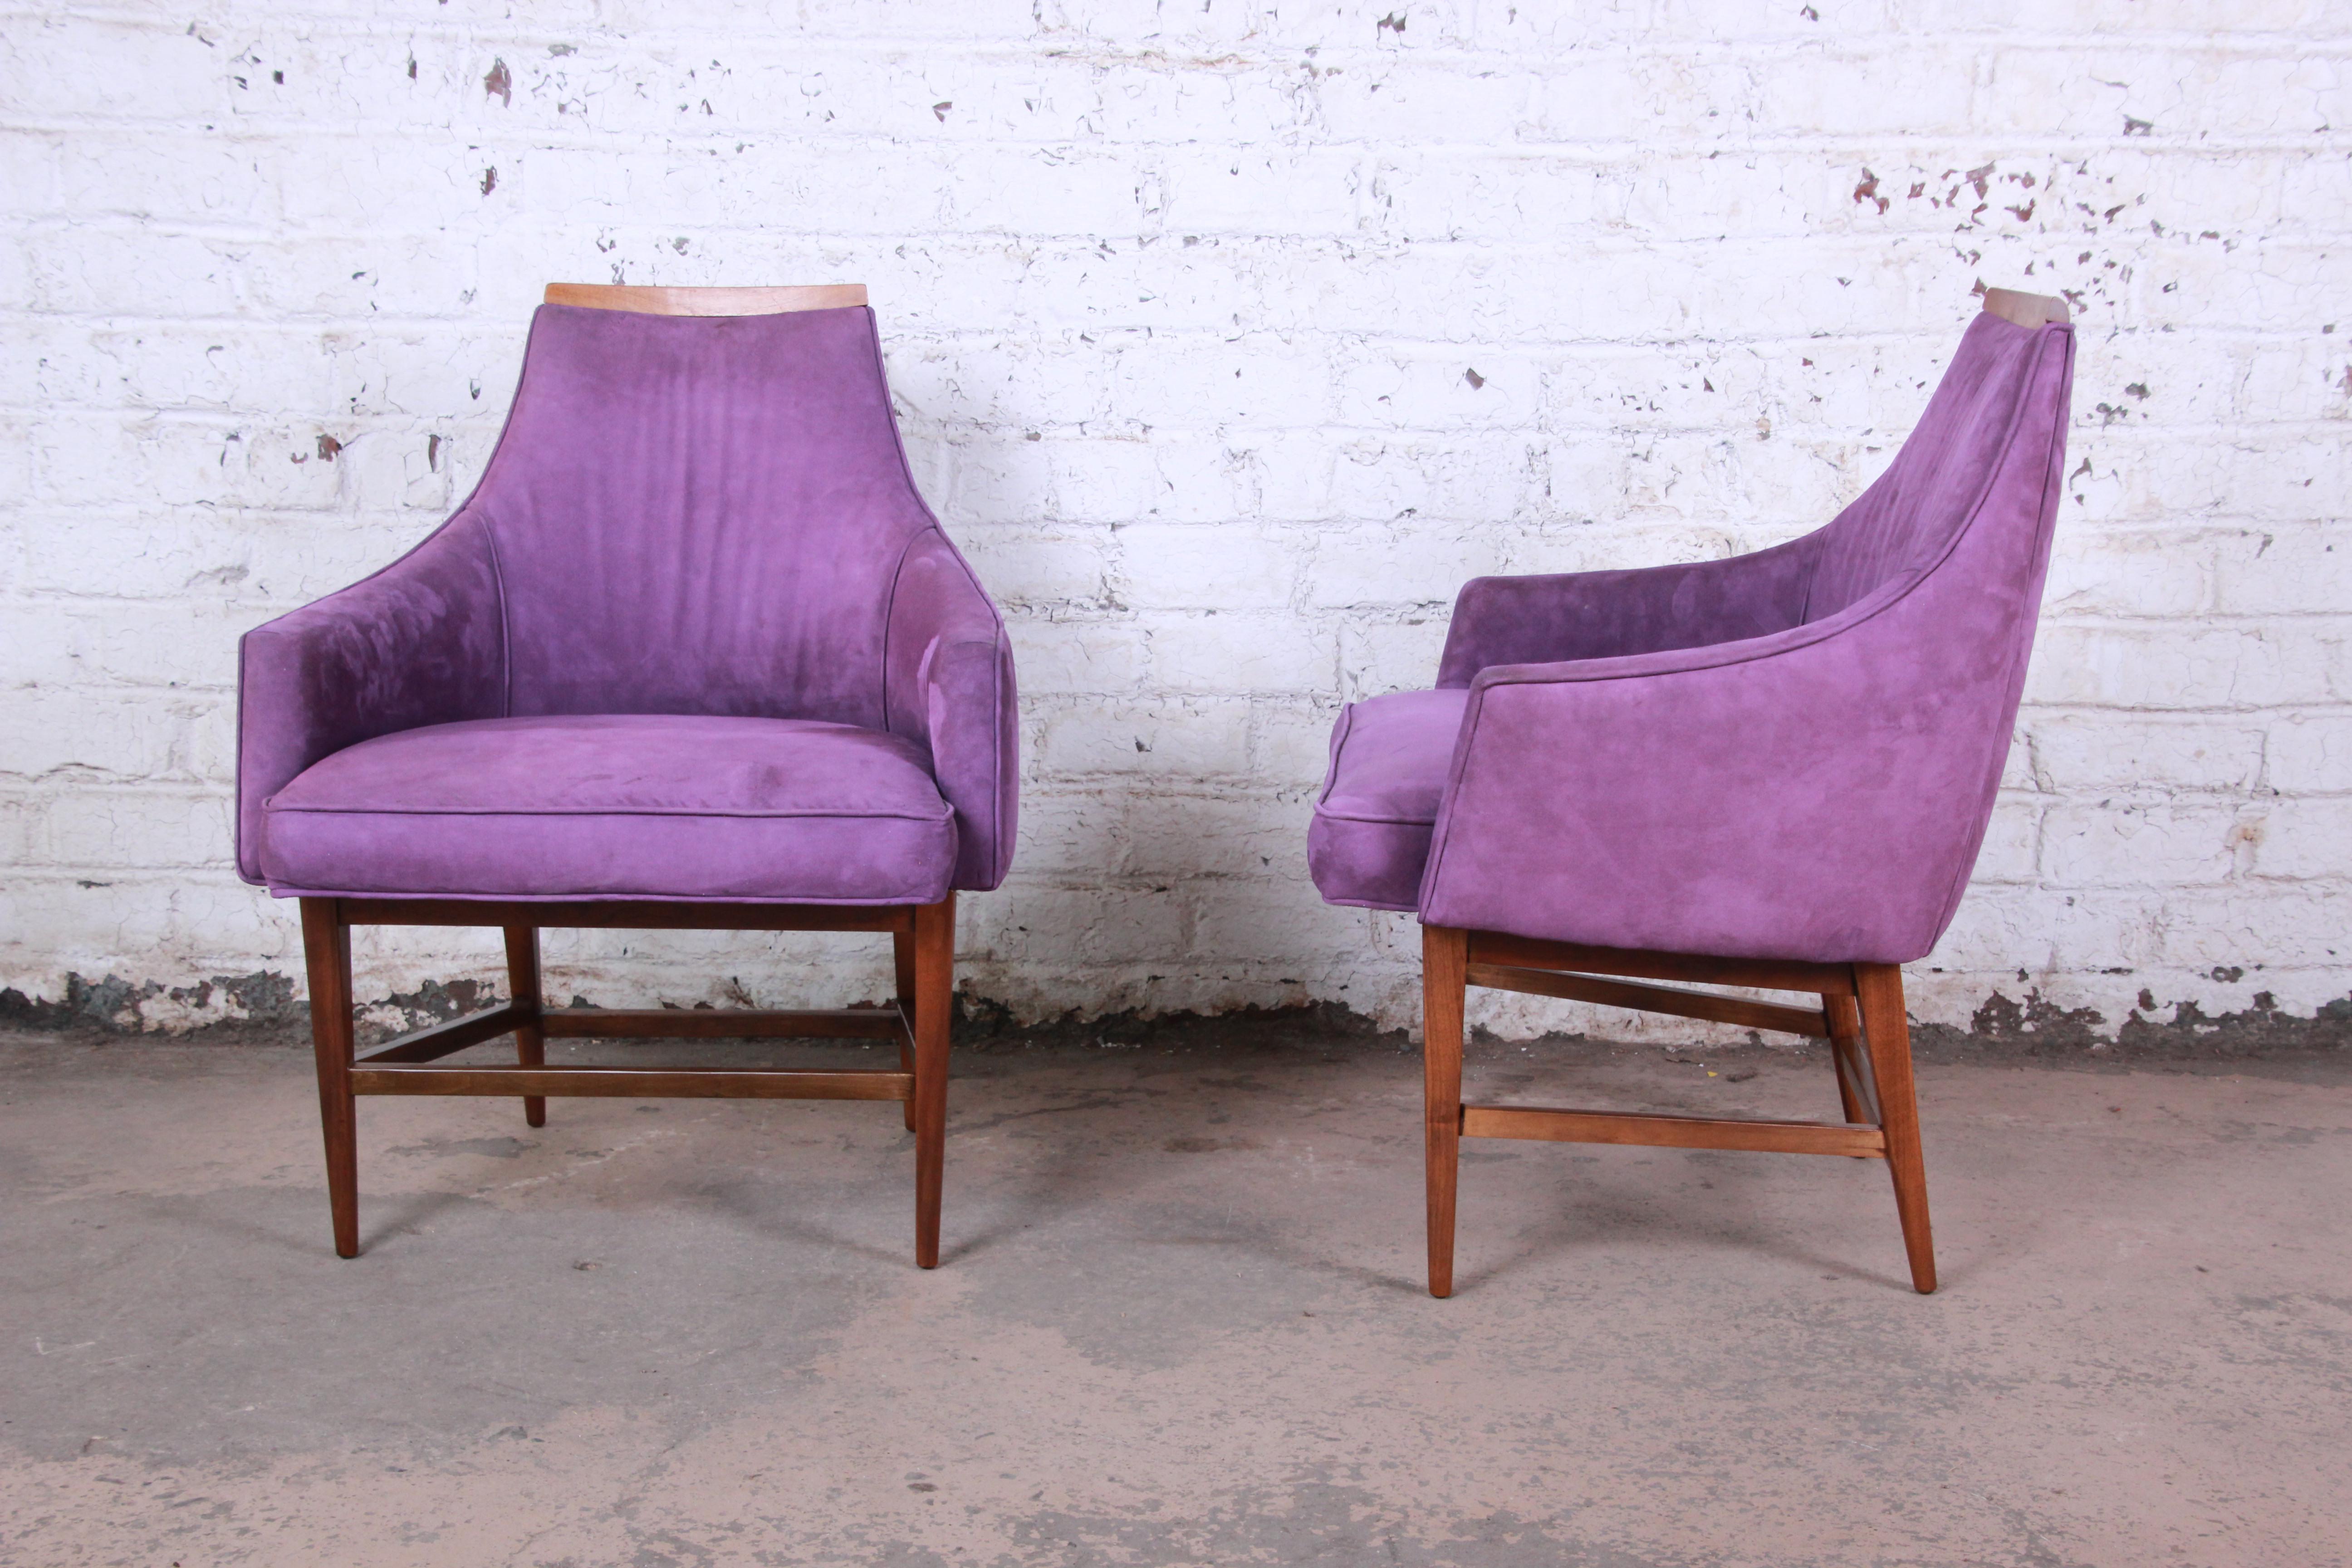 A gorgeous pair of Mid-Century Modern lounge chairs designed by Kipp Stewart for Directional. The chairs feature solid walnut frames, striking original purple upholstery, and sleek midcentury design. A perfect blend of style and comfort. The walnut